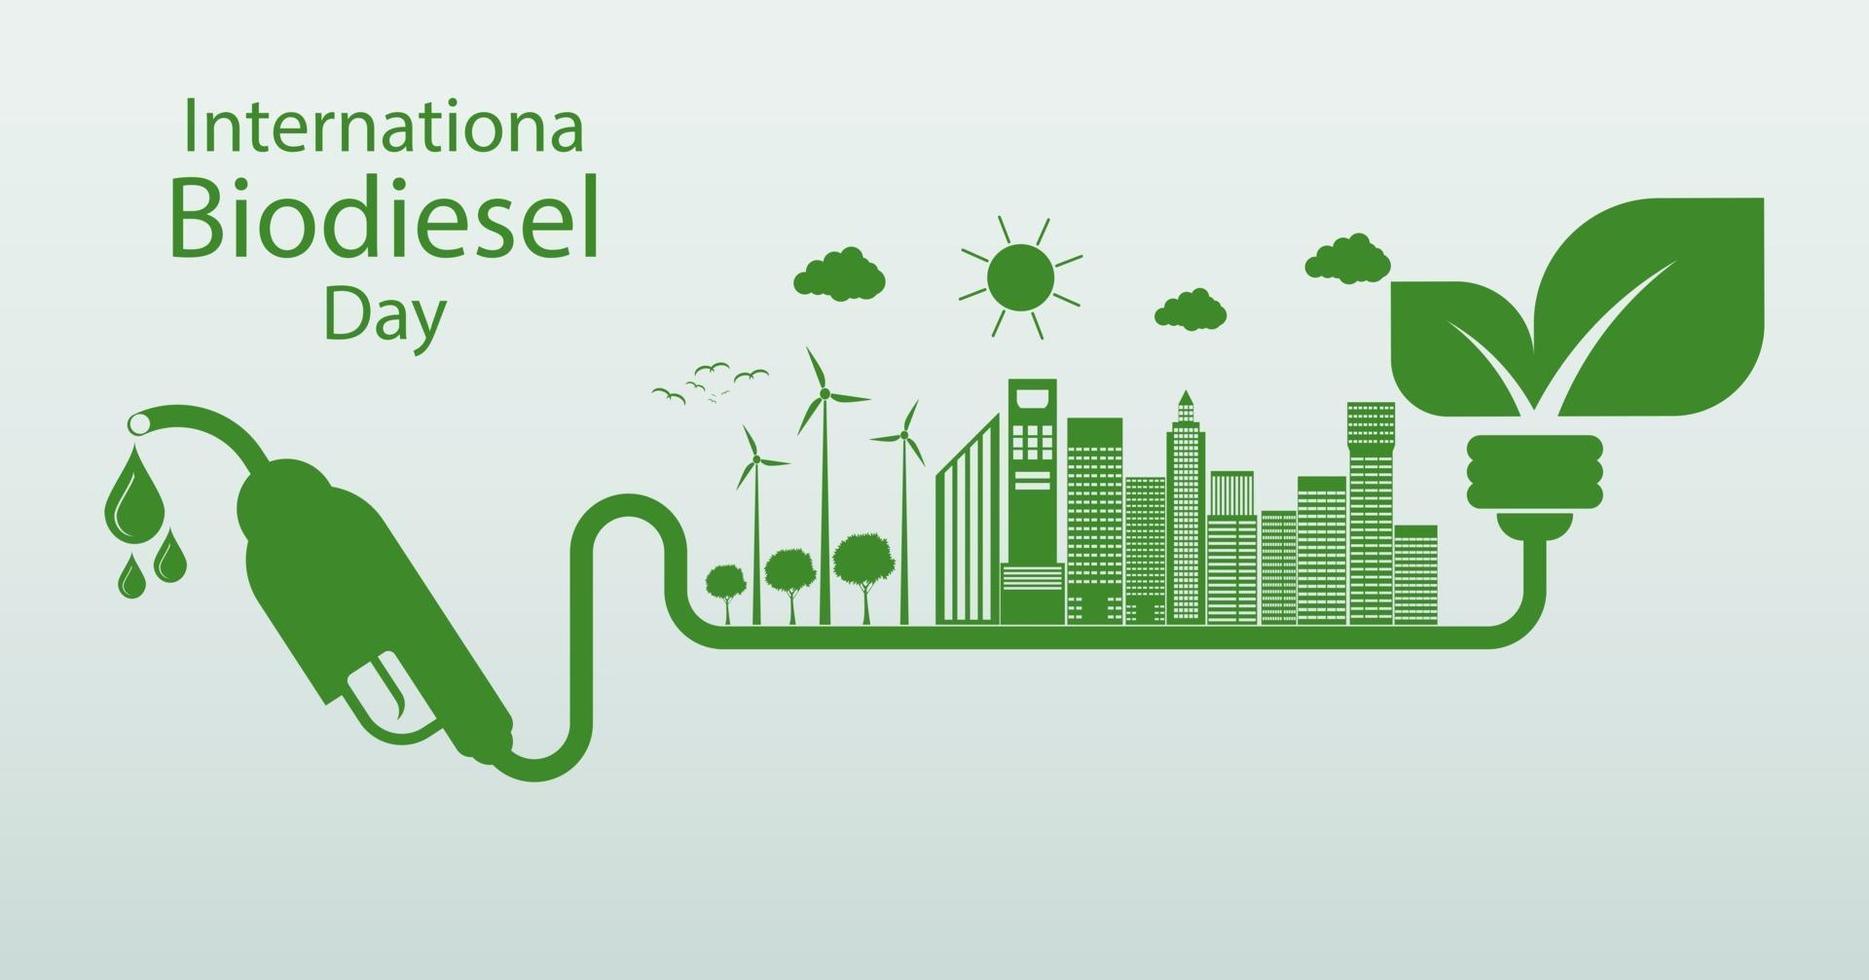 International Biodiesel Day 10 August for Ecology and Environmental Help The World With Eco Friendly Ideas vector